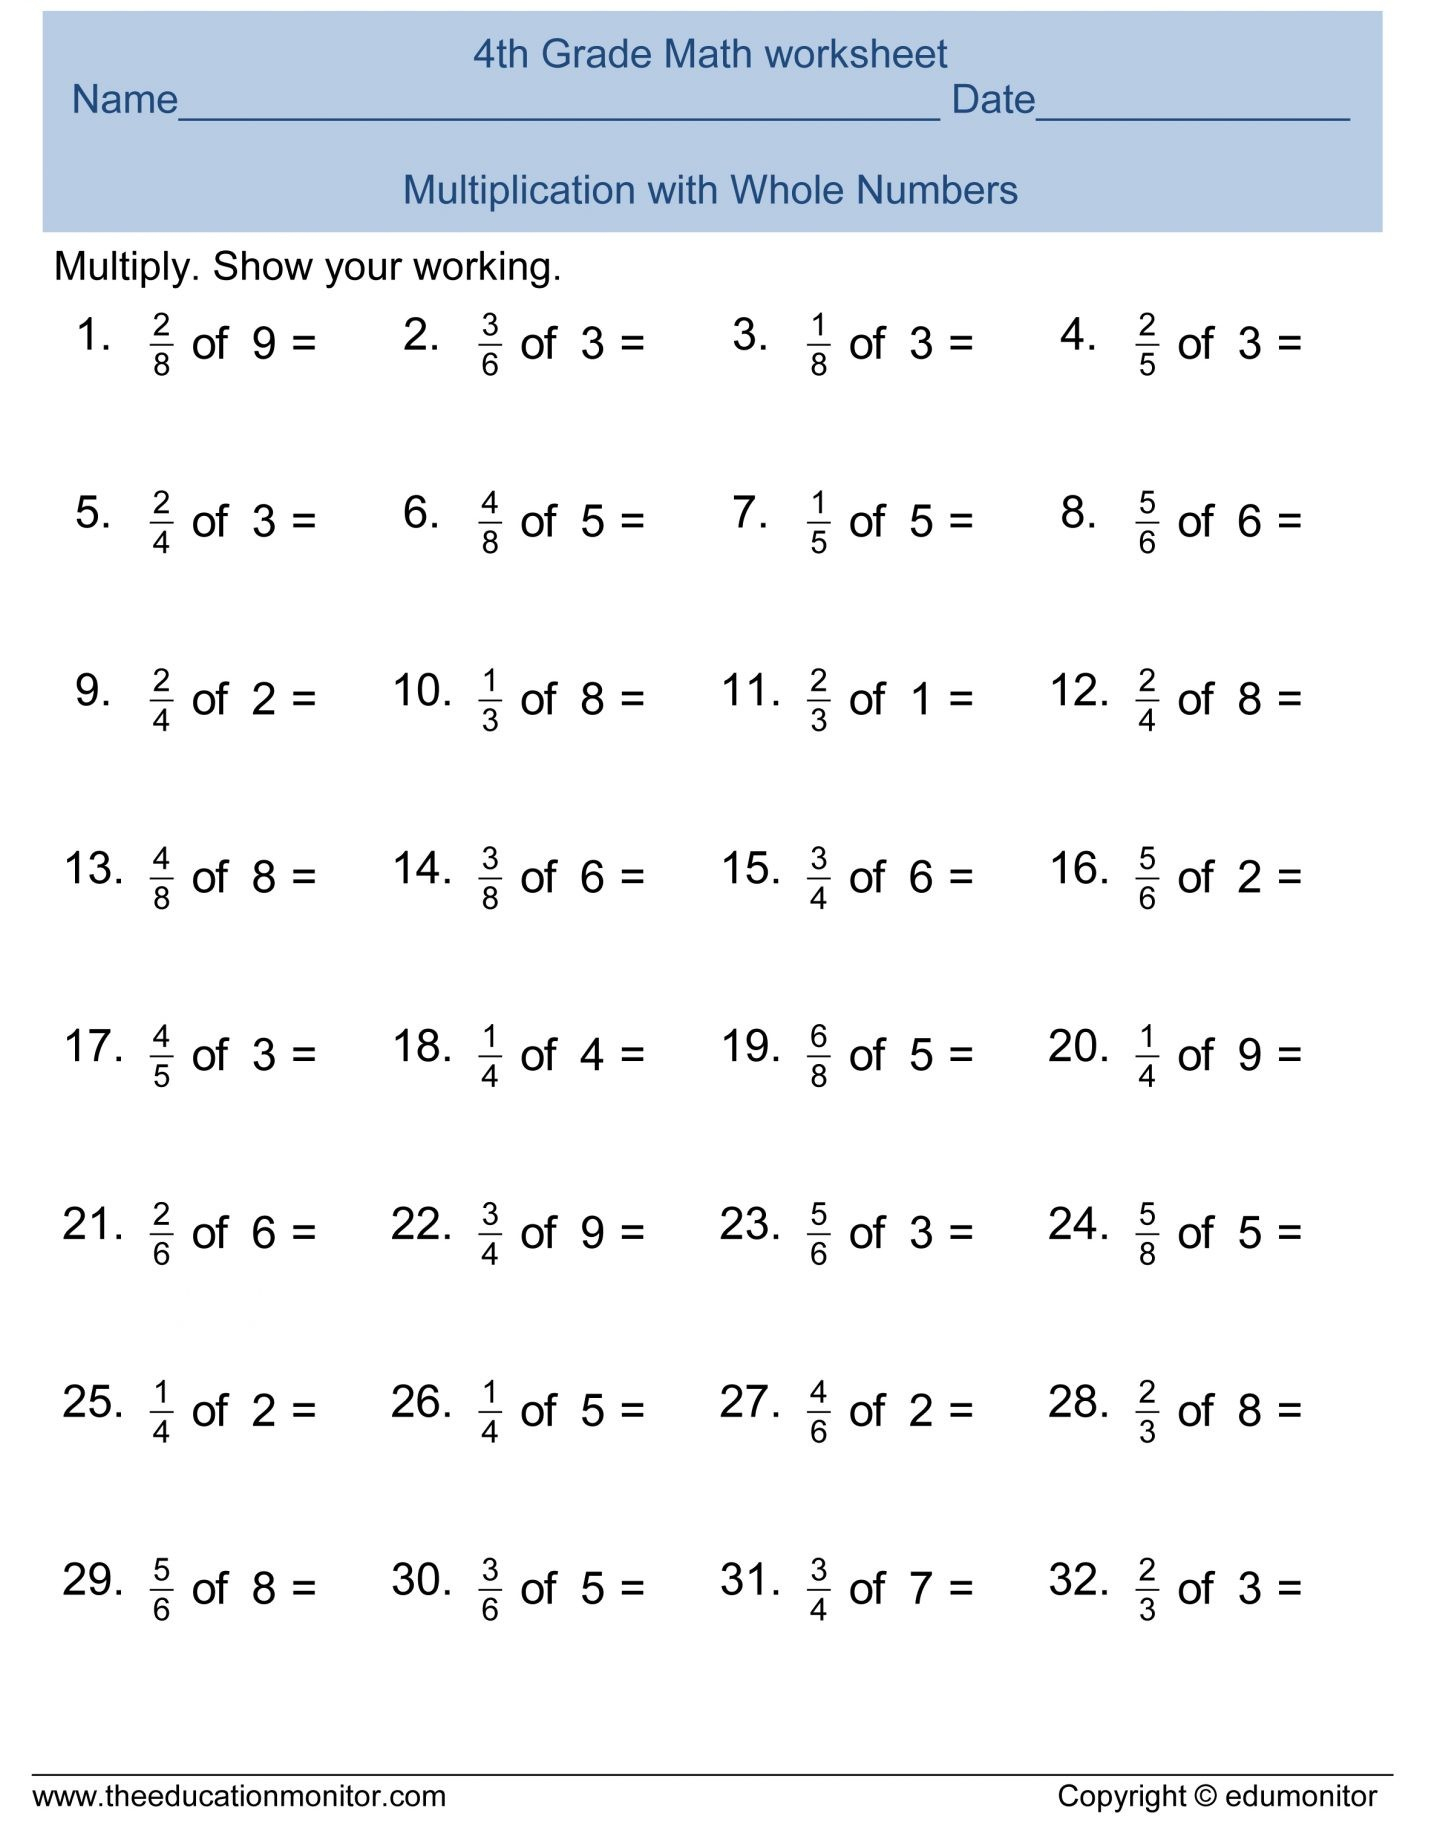 7Th Grade Math Worksheets Free Printable With Answers Stunning - 7Th | 7Th Grade Math Worksheets Free Printable With Answers